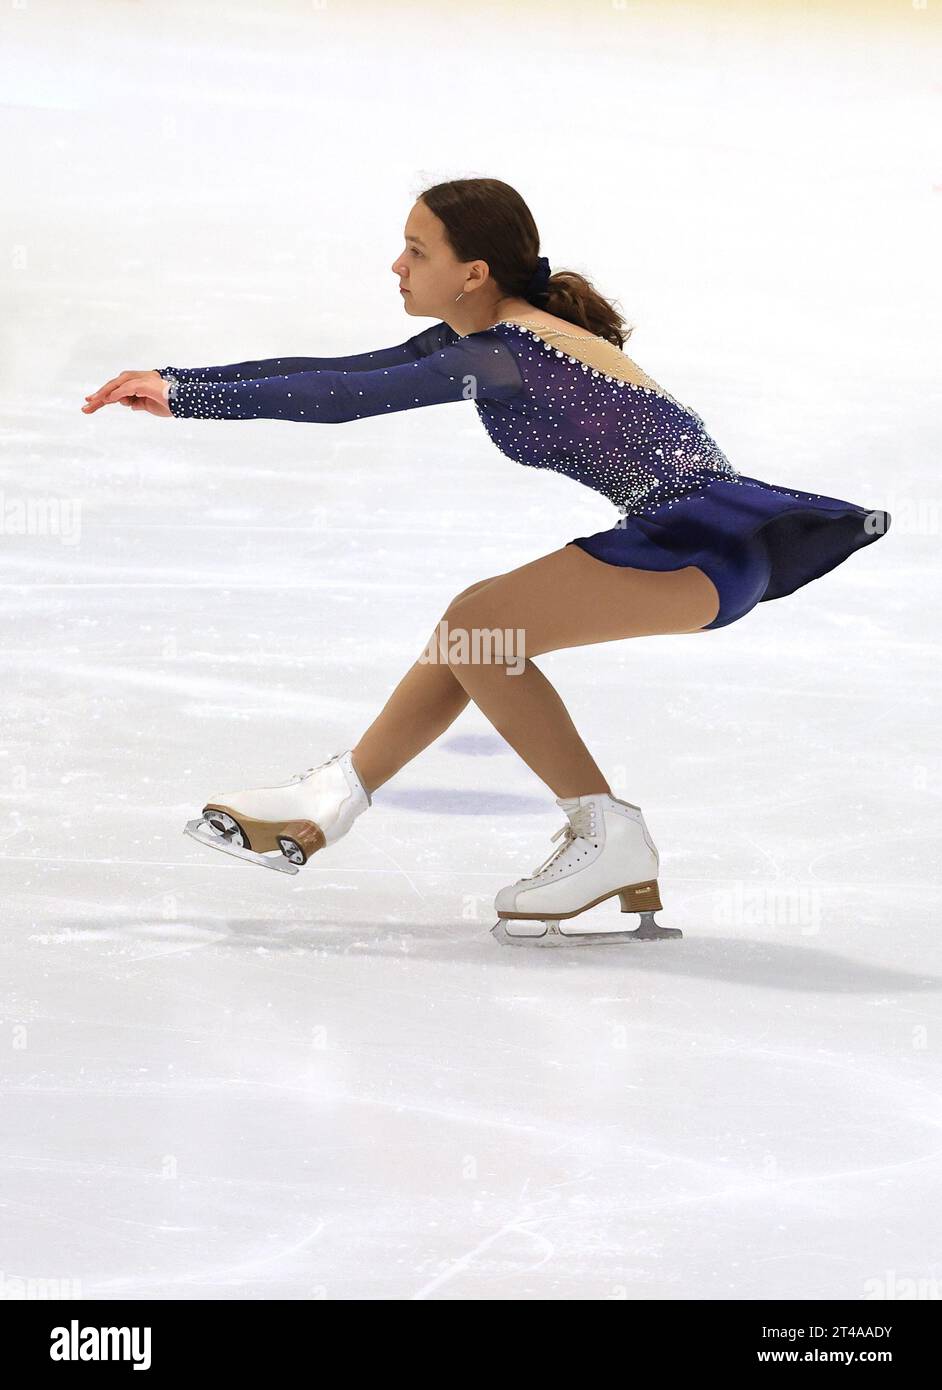 Teenager girl practicing figure skating on an indoor ice skating rink Stock Photo